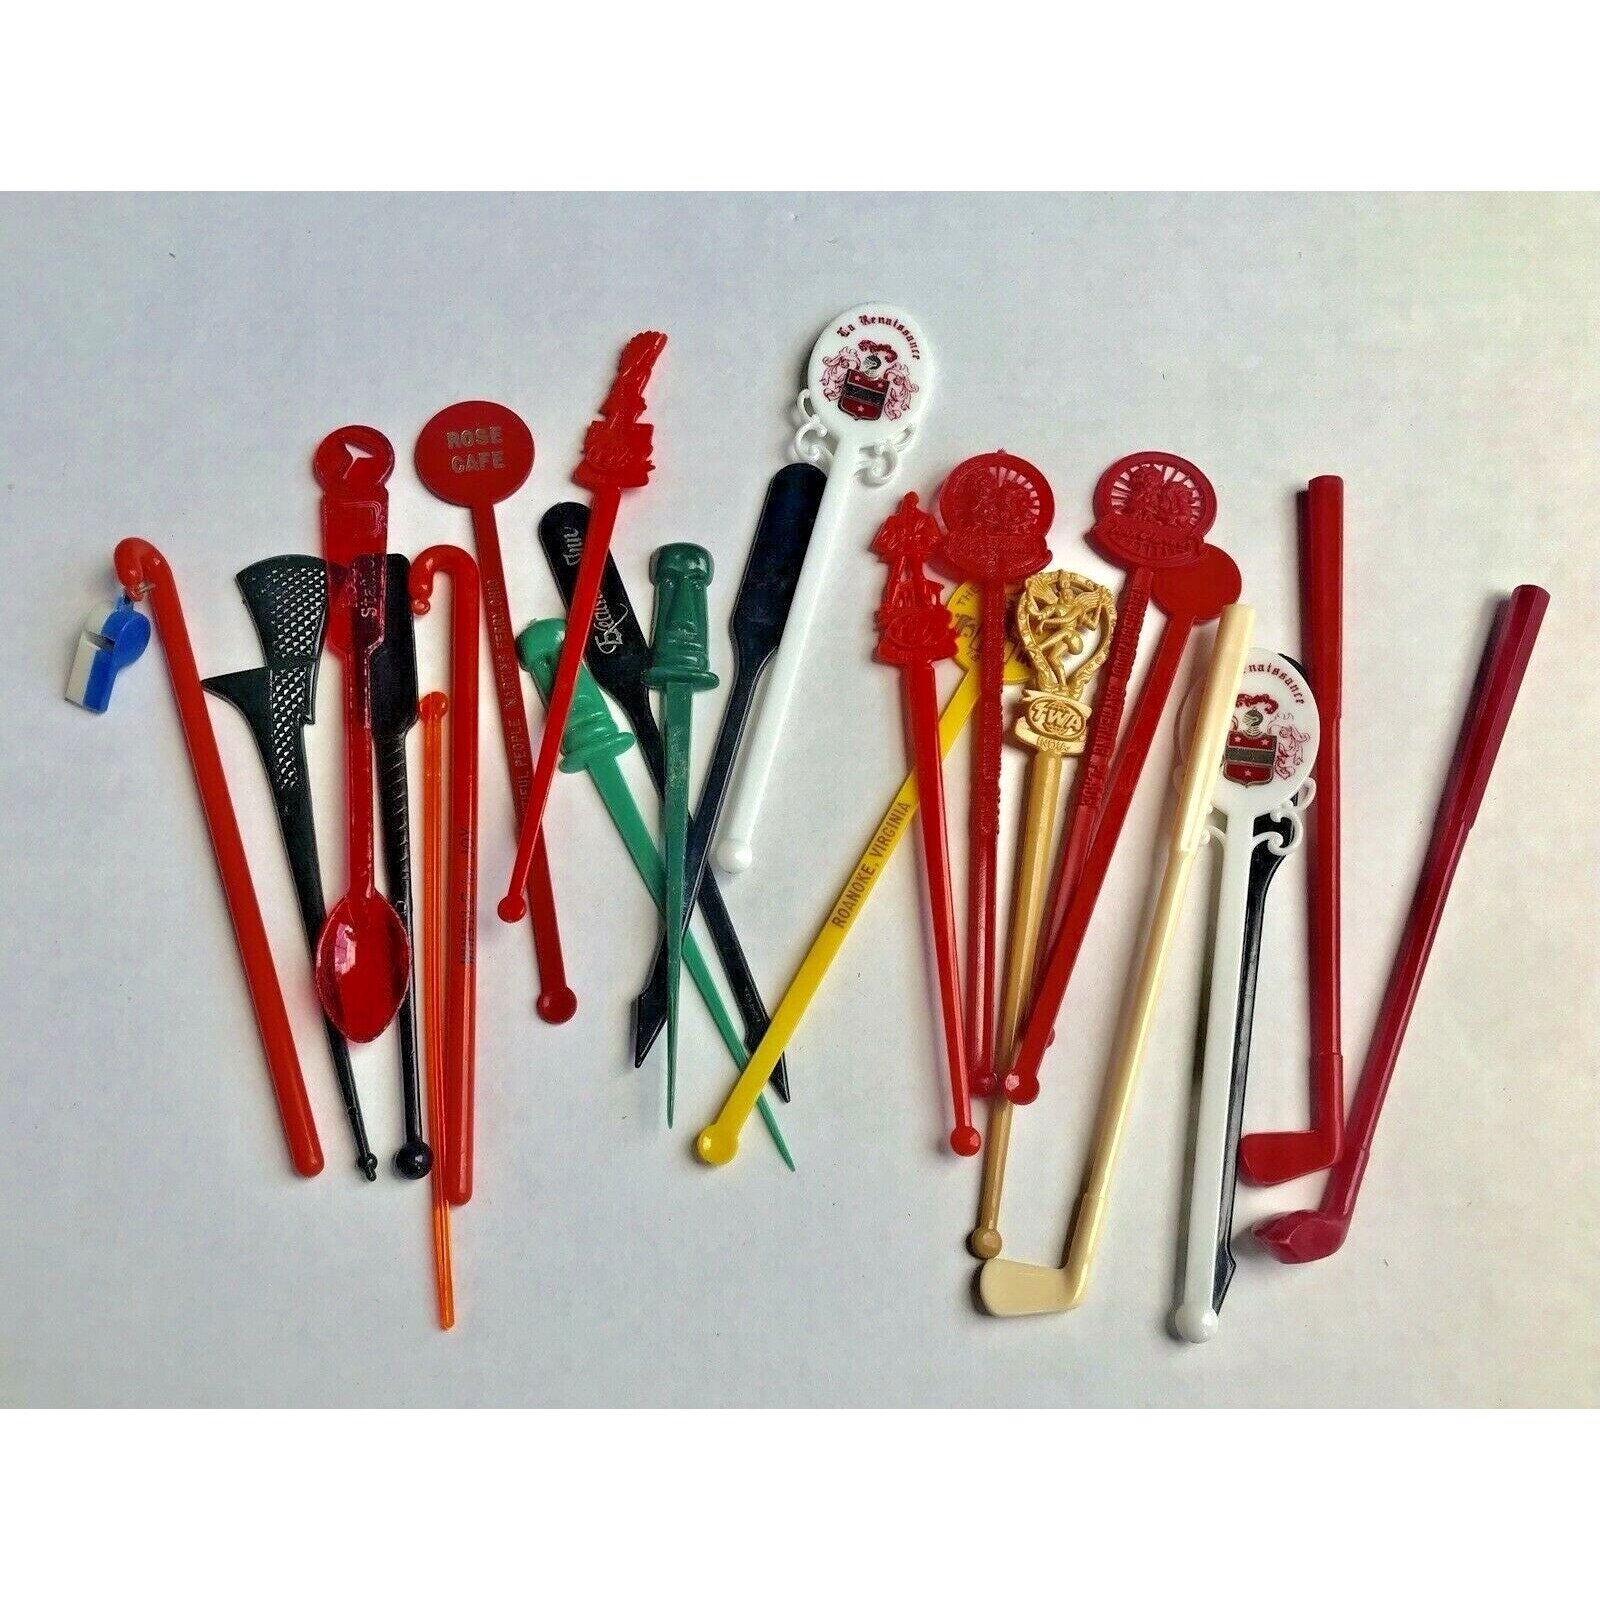 Vintage Plastic Drink Stir Sticks From Cocktail Lounges and Restaurants  Around the US Collection of Drink Stirrers & Ice Cream Drink Spoons 